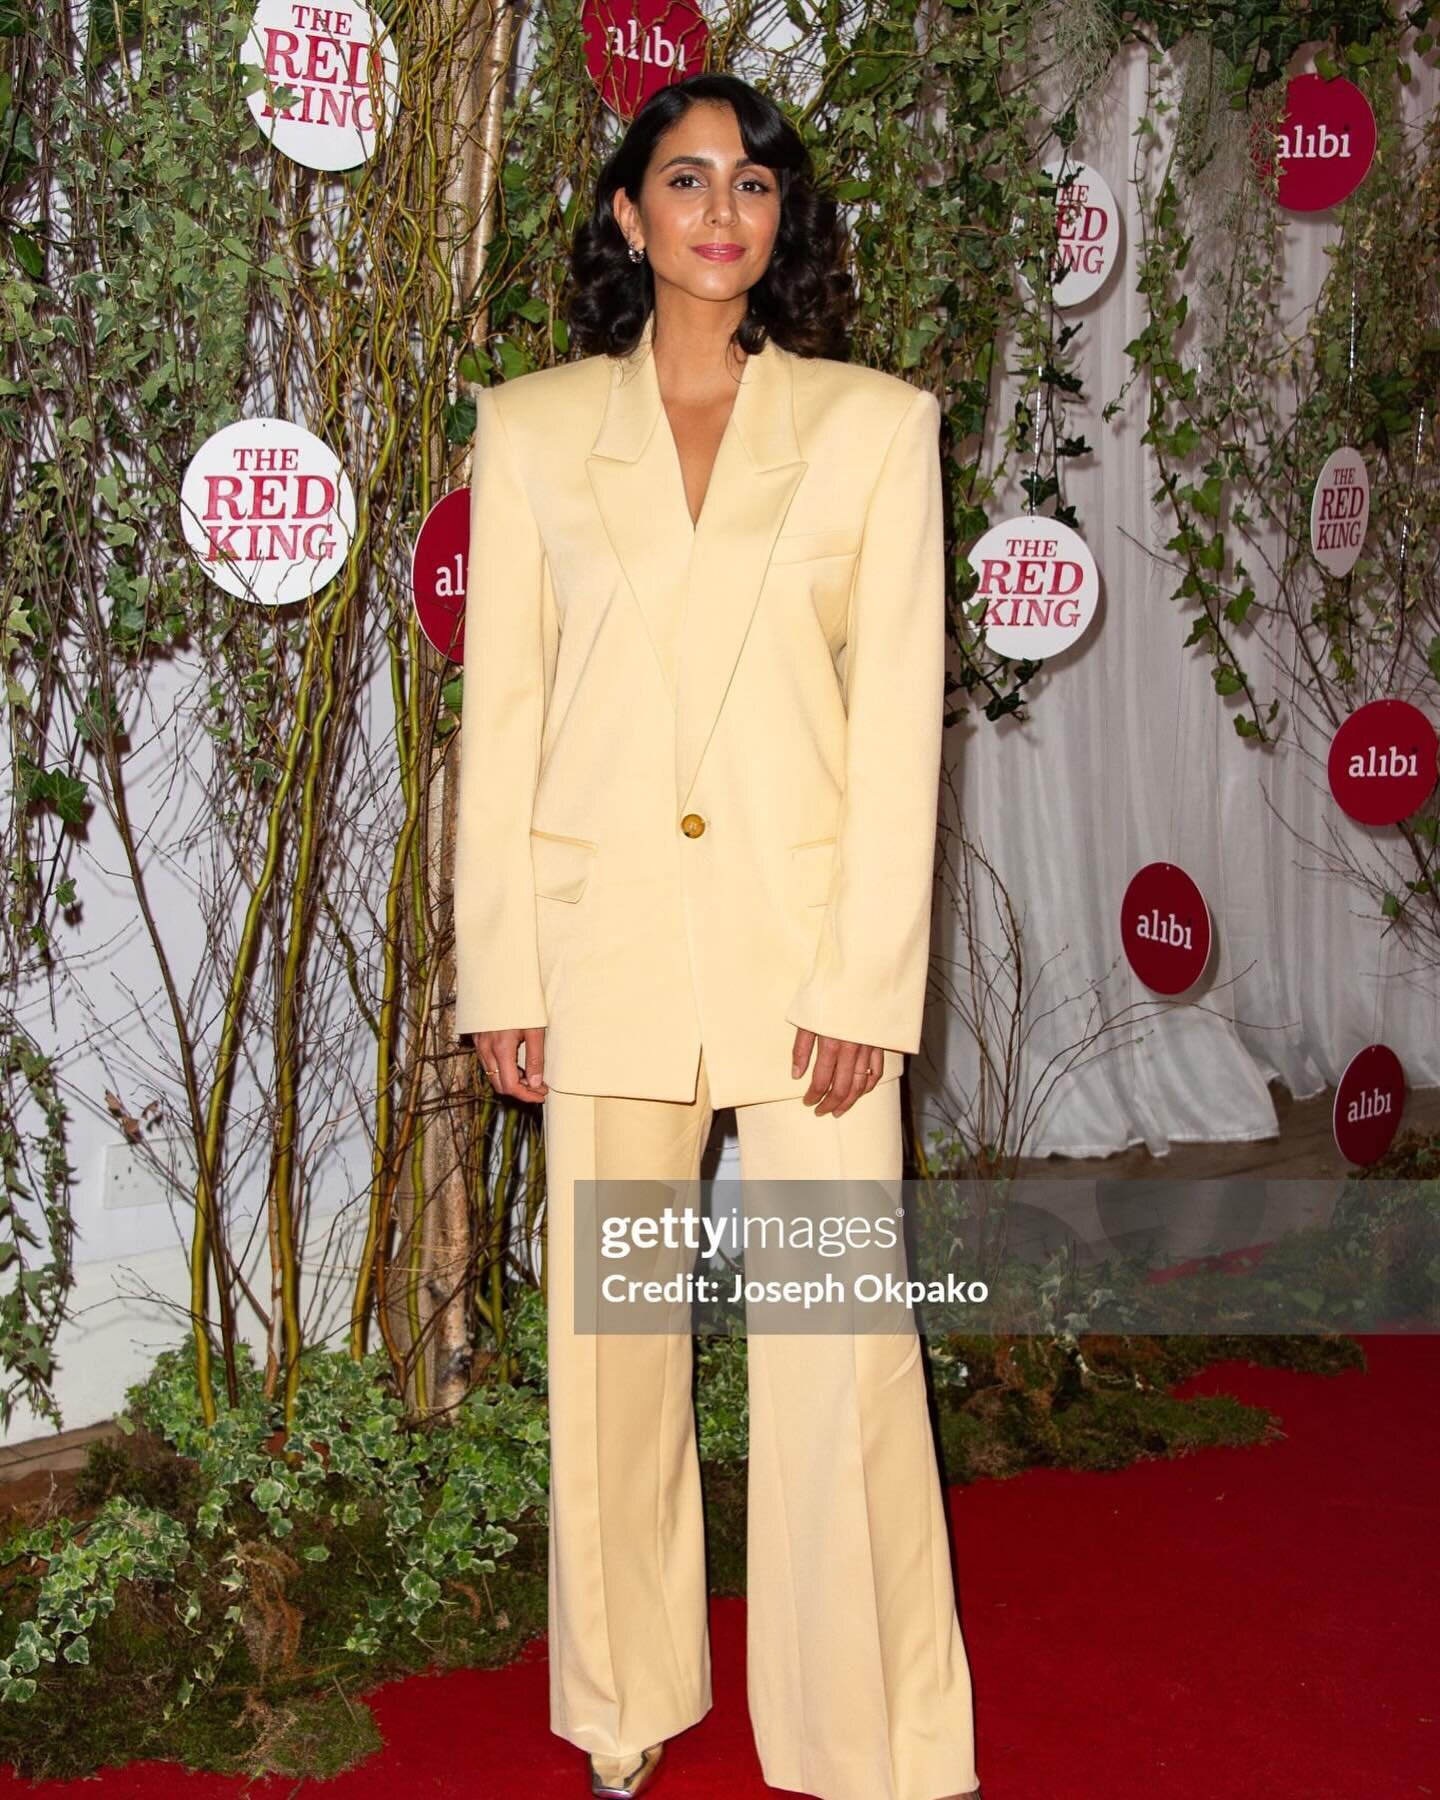 Our #anjlimohindra at the premiere of her brand new show #TheRedKing in which she stars as Grace Narayan. Coming to @alibichannel in April. Written by Tony Whithouse and produced by @quaystreetproductions 

Tap for Glam Credits